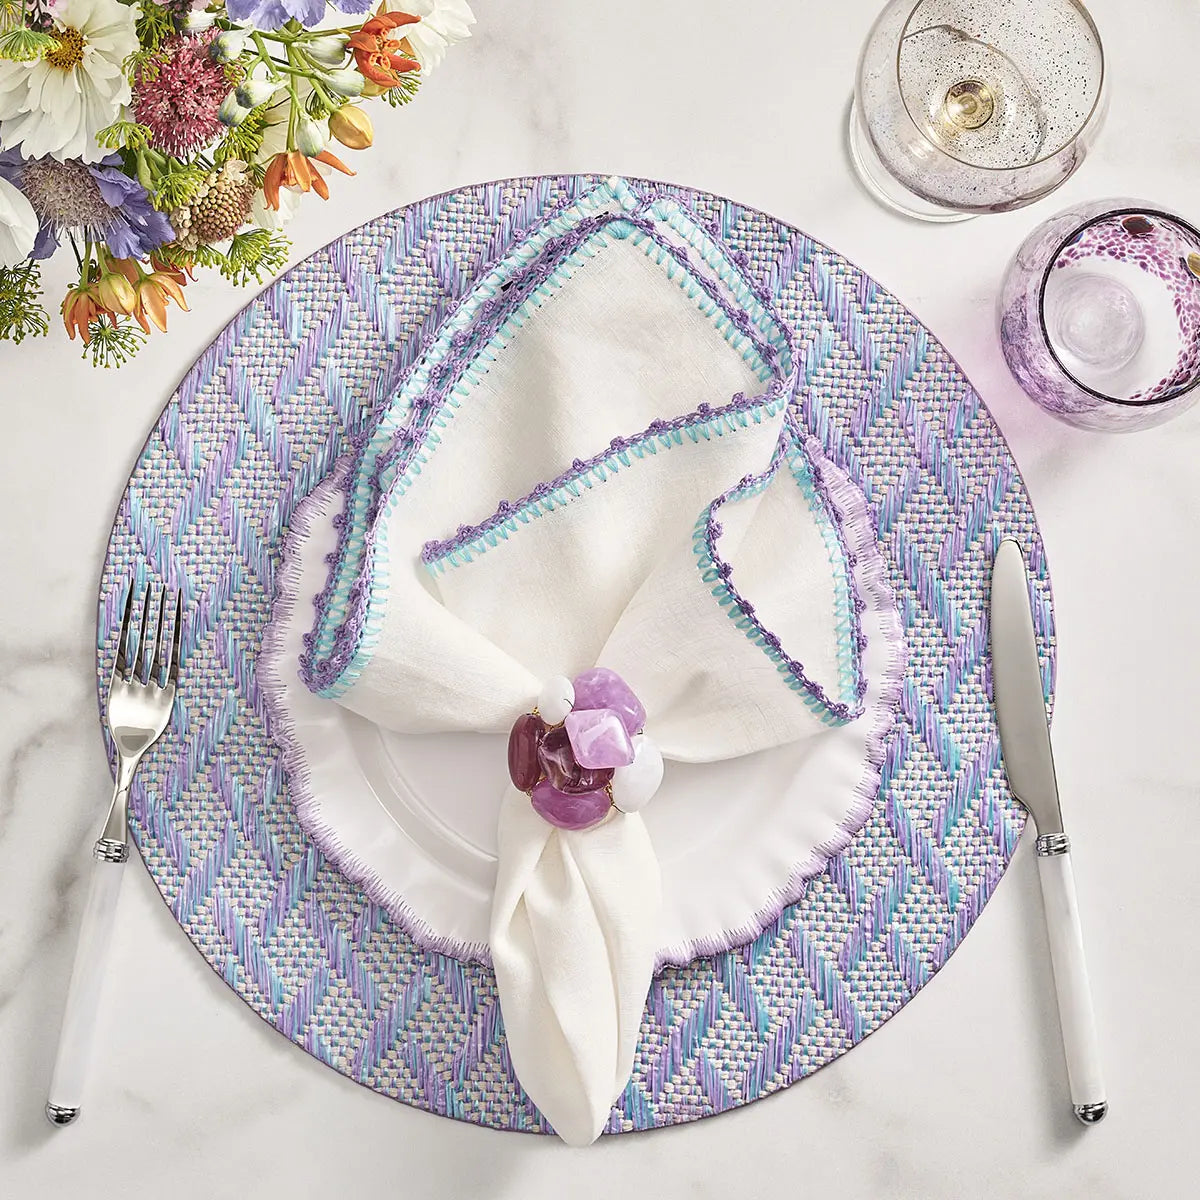 Kim Seybert Basketweave Placemat in Lilac Blue set on a table with dinnerware